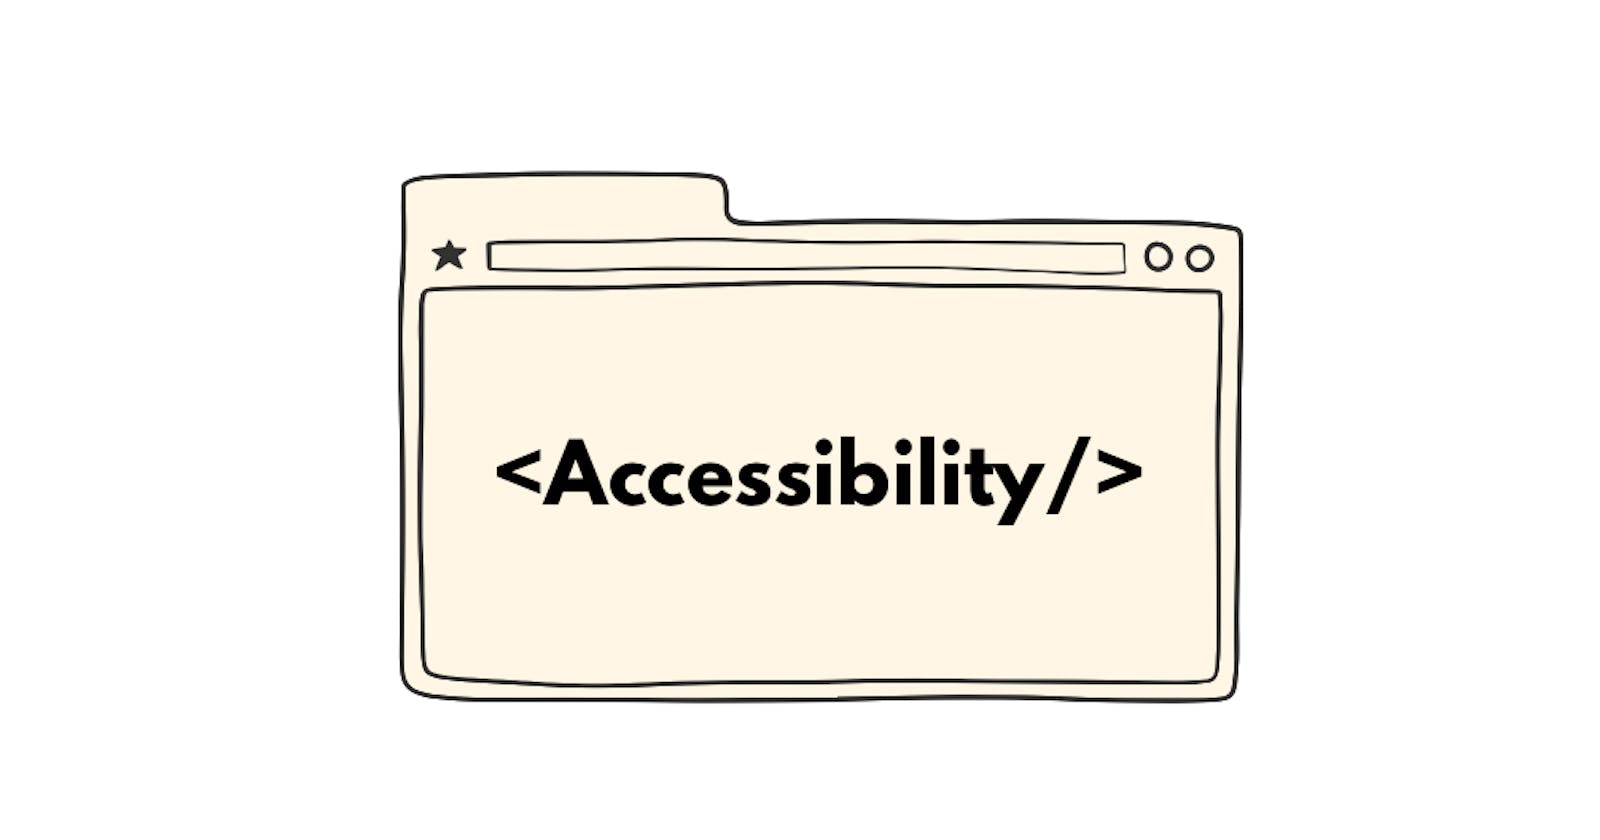 Accessibility - Getting Started with the mindset